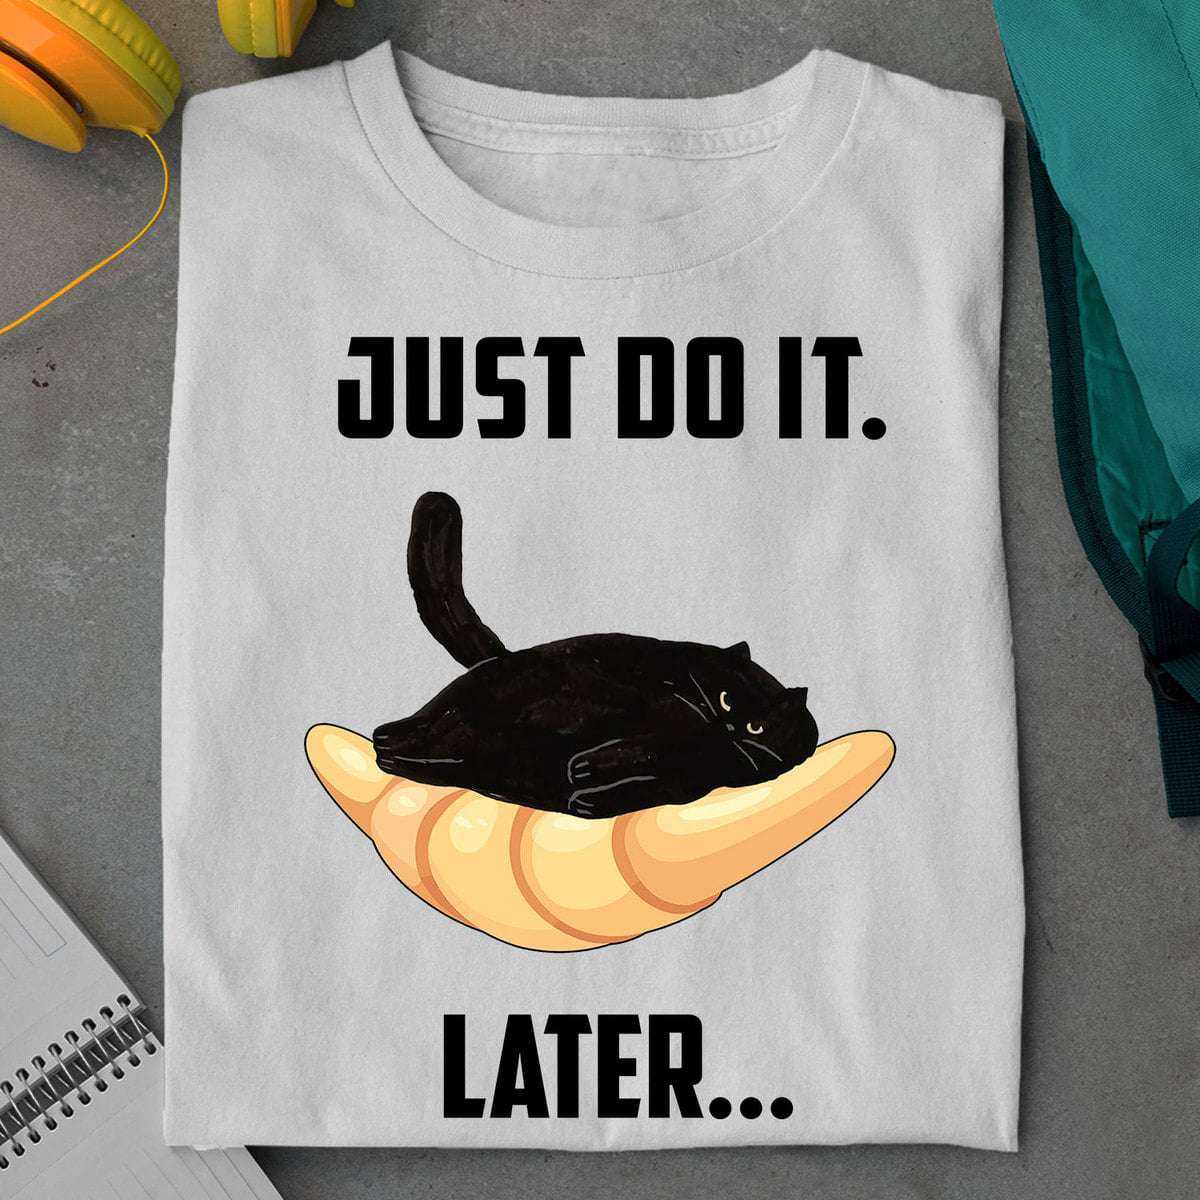 Balck Cat Cake - Just do it later